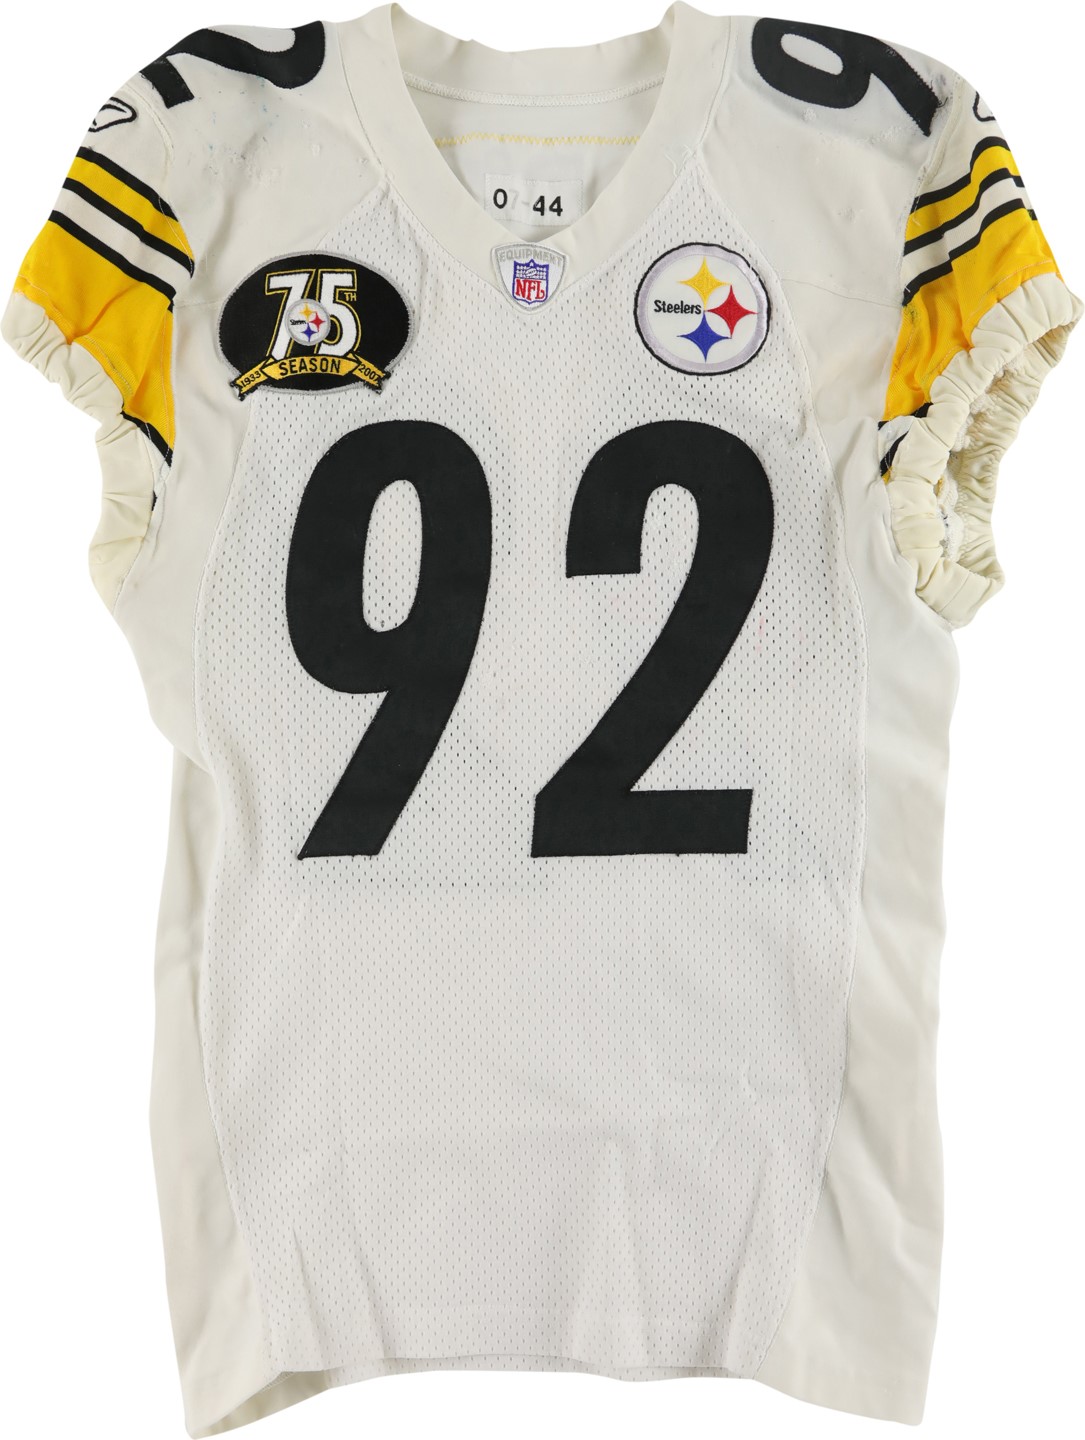 The Pittsburgh Steelers Game Worn Jersey Archive - 2007 James Harrison Pittsburgh Steelers Game Worn Jersey (Photo-Matched to Three Games)